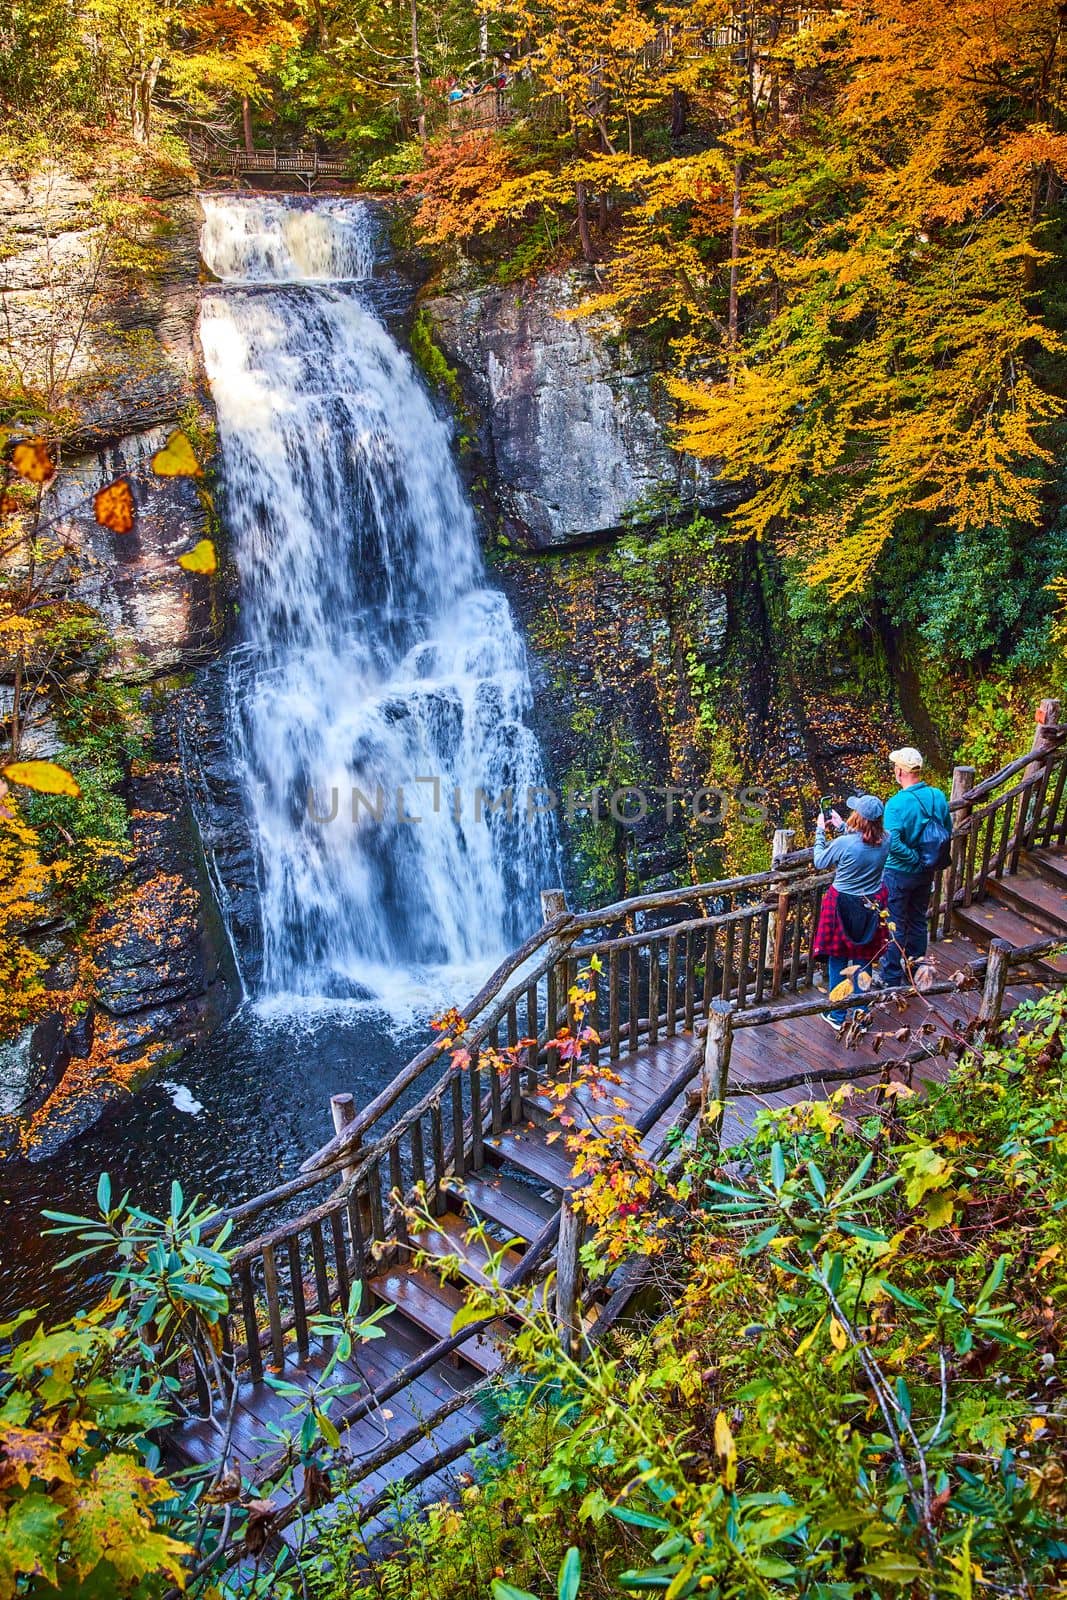 Image of Couple enjoying view from boardwalk of huge stunning waterfall over cliffs surrounded by fall foliage